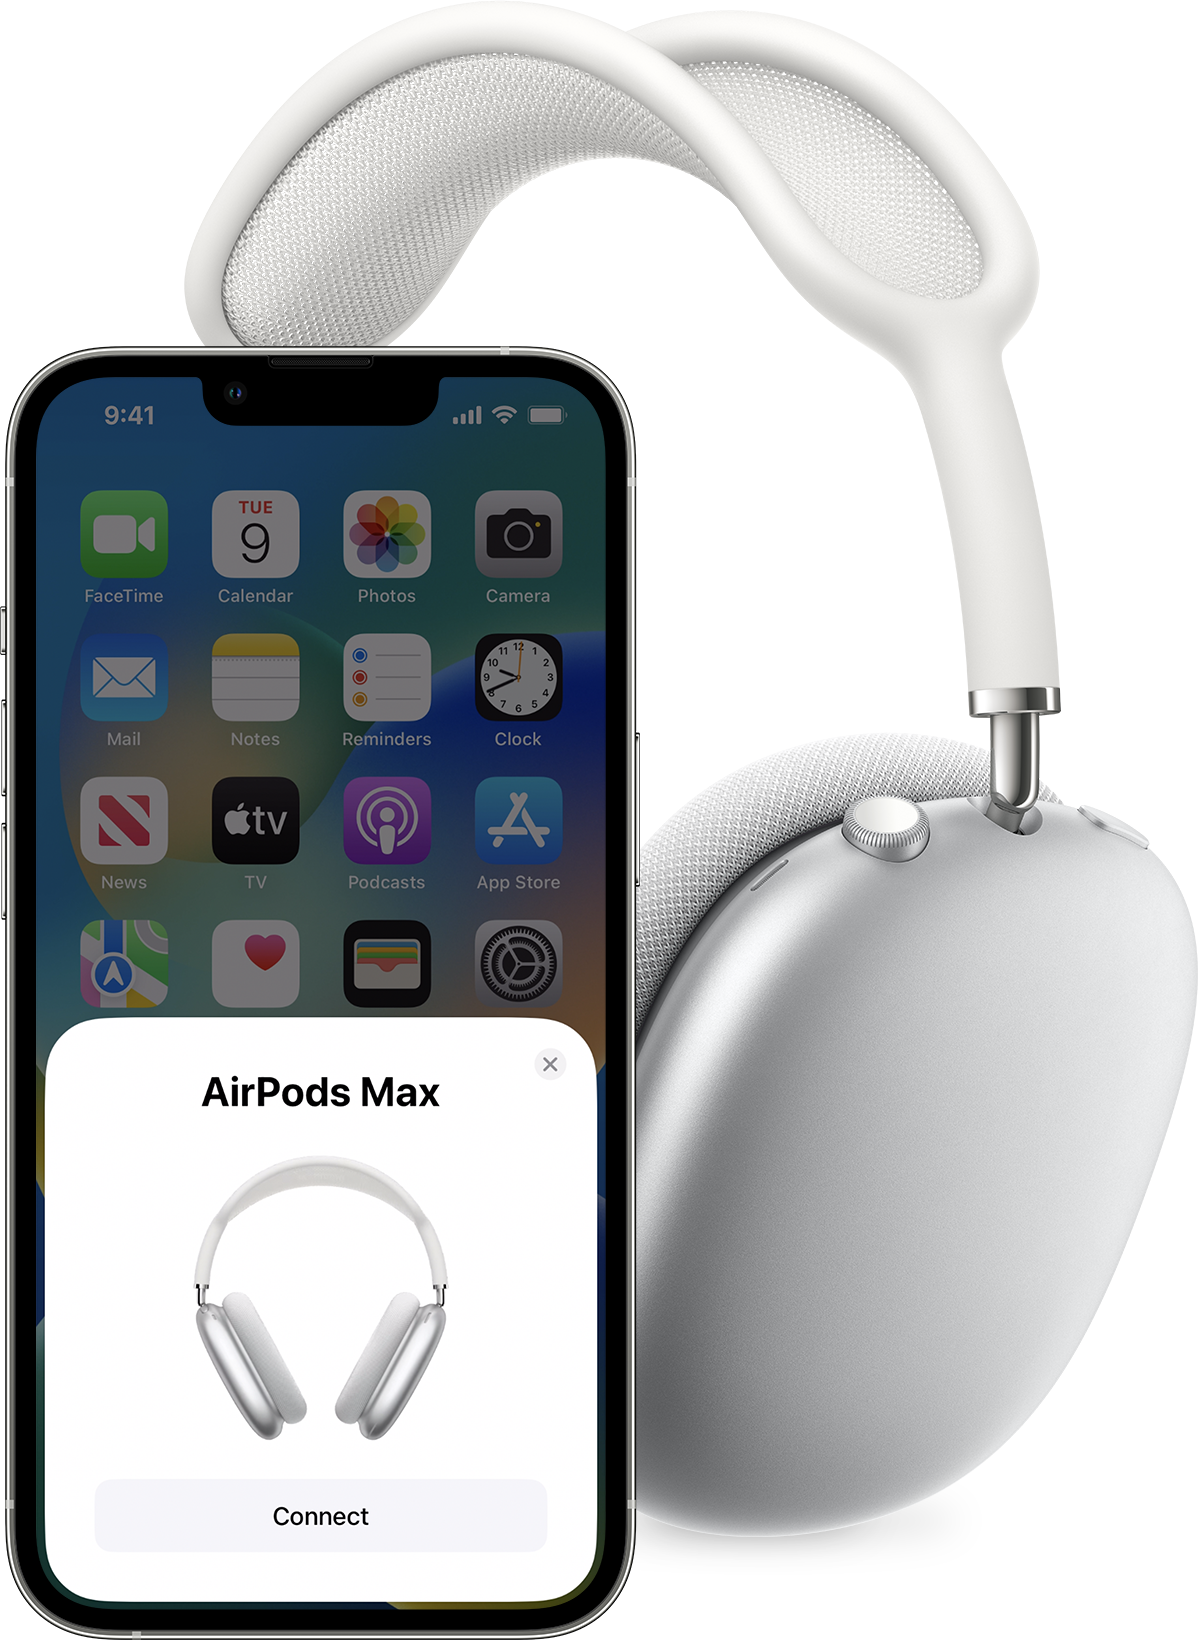 ios16-iphone13-pro-connect-airpods-max